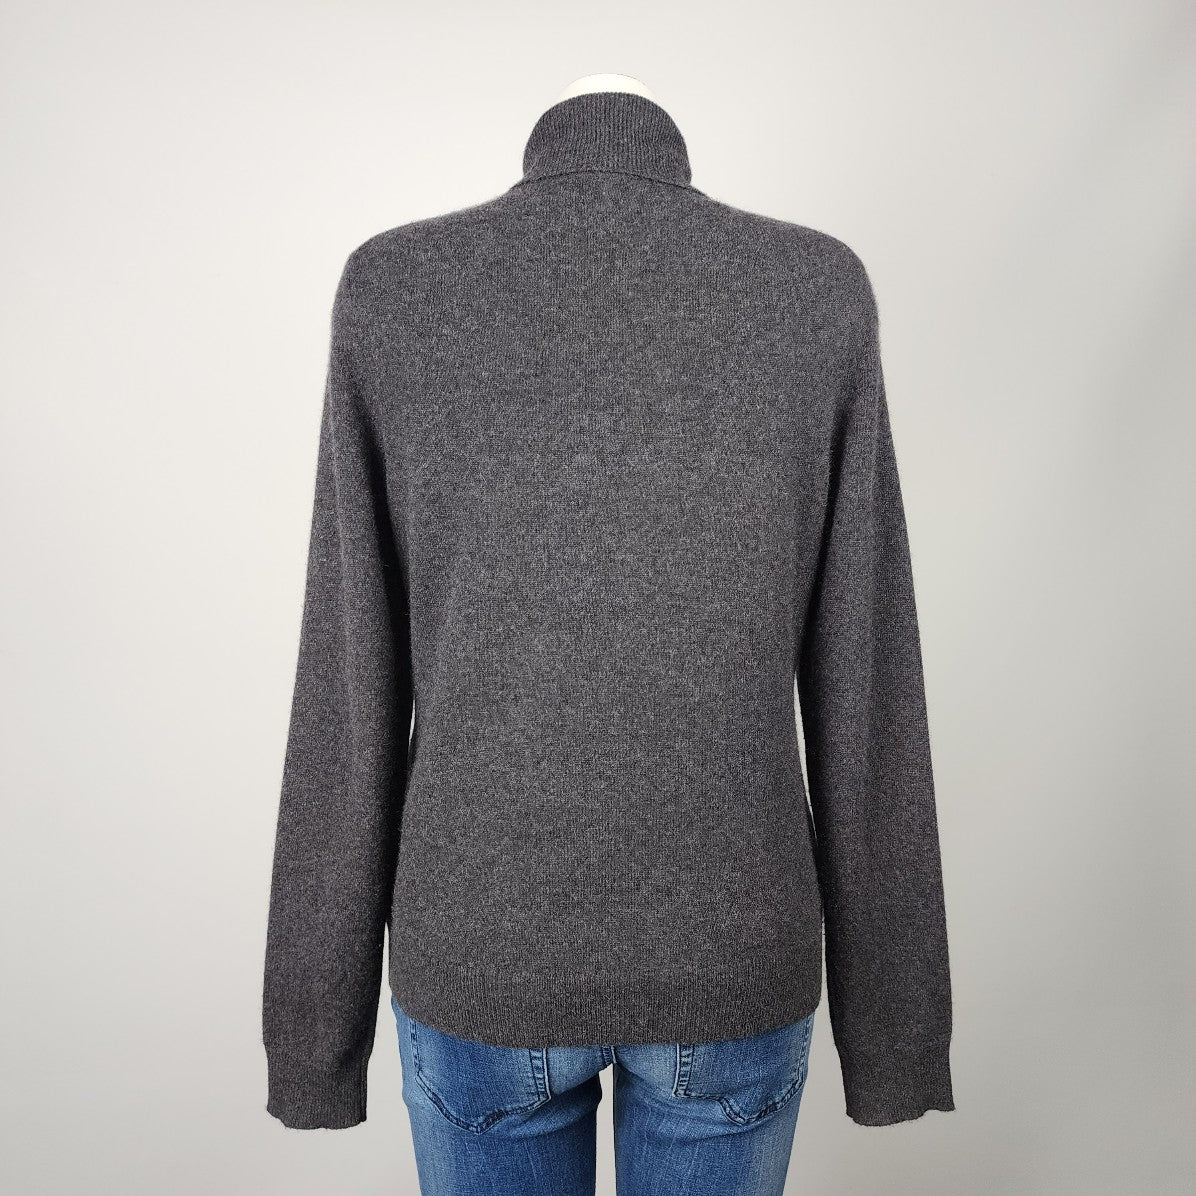 Lord & Taylor Cashmere Grey Turtle Neck Sweater Size L